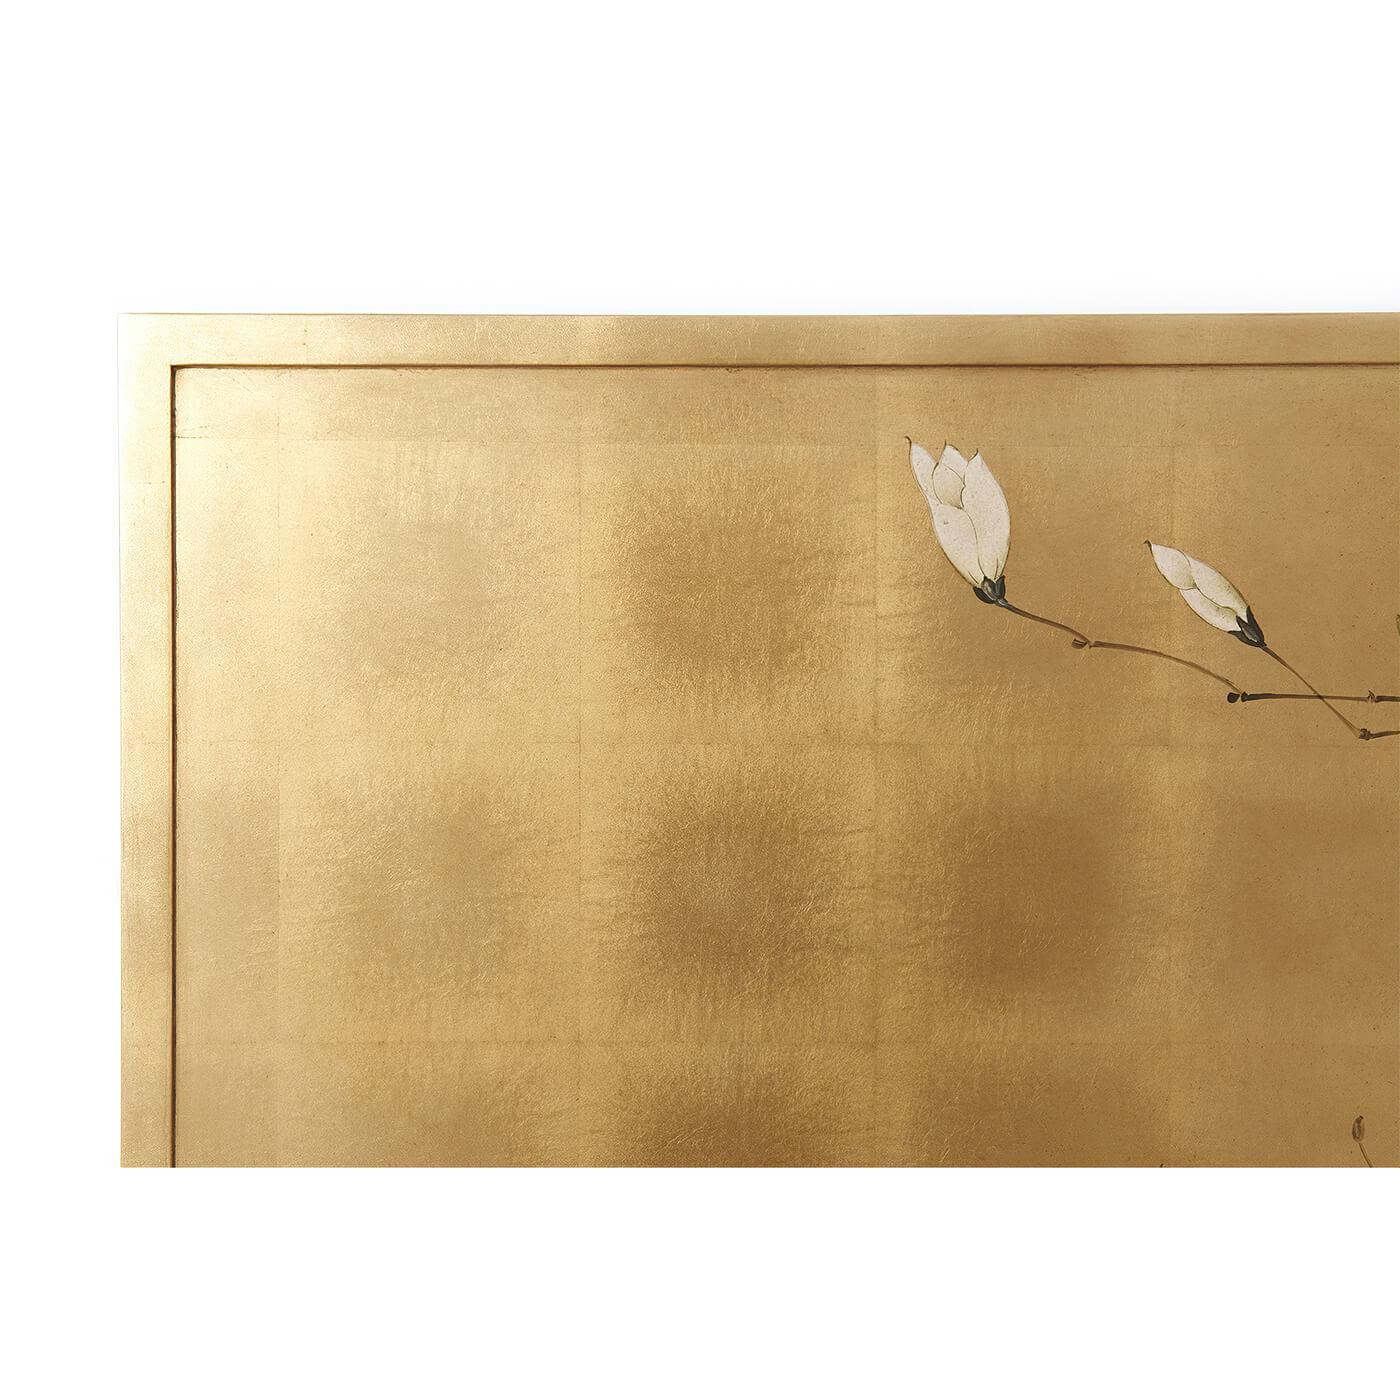 A set of two Japanese paintings, each with a hand gilt background depicting a Japanese Magnolia painted sans traverse across the two panels. The originals Japanese, circa 1900.

Dimensions: 56.25